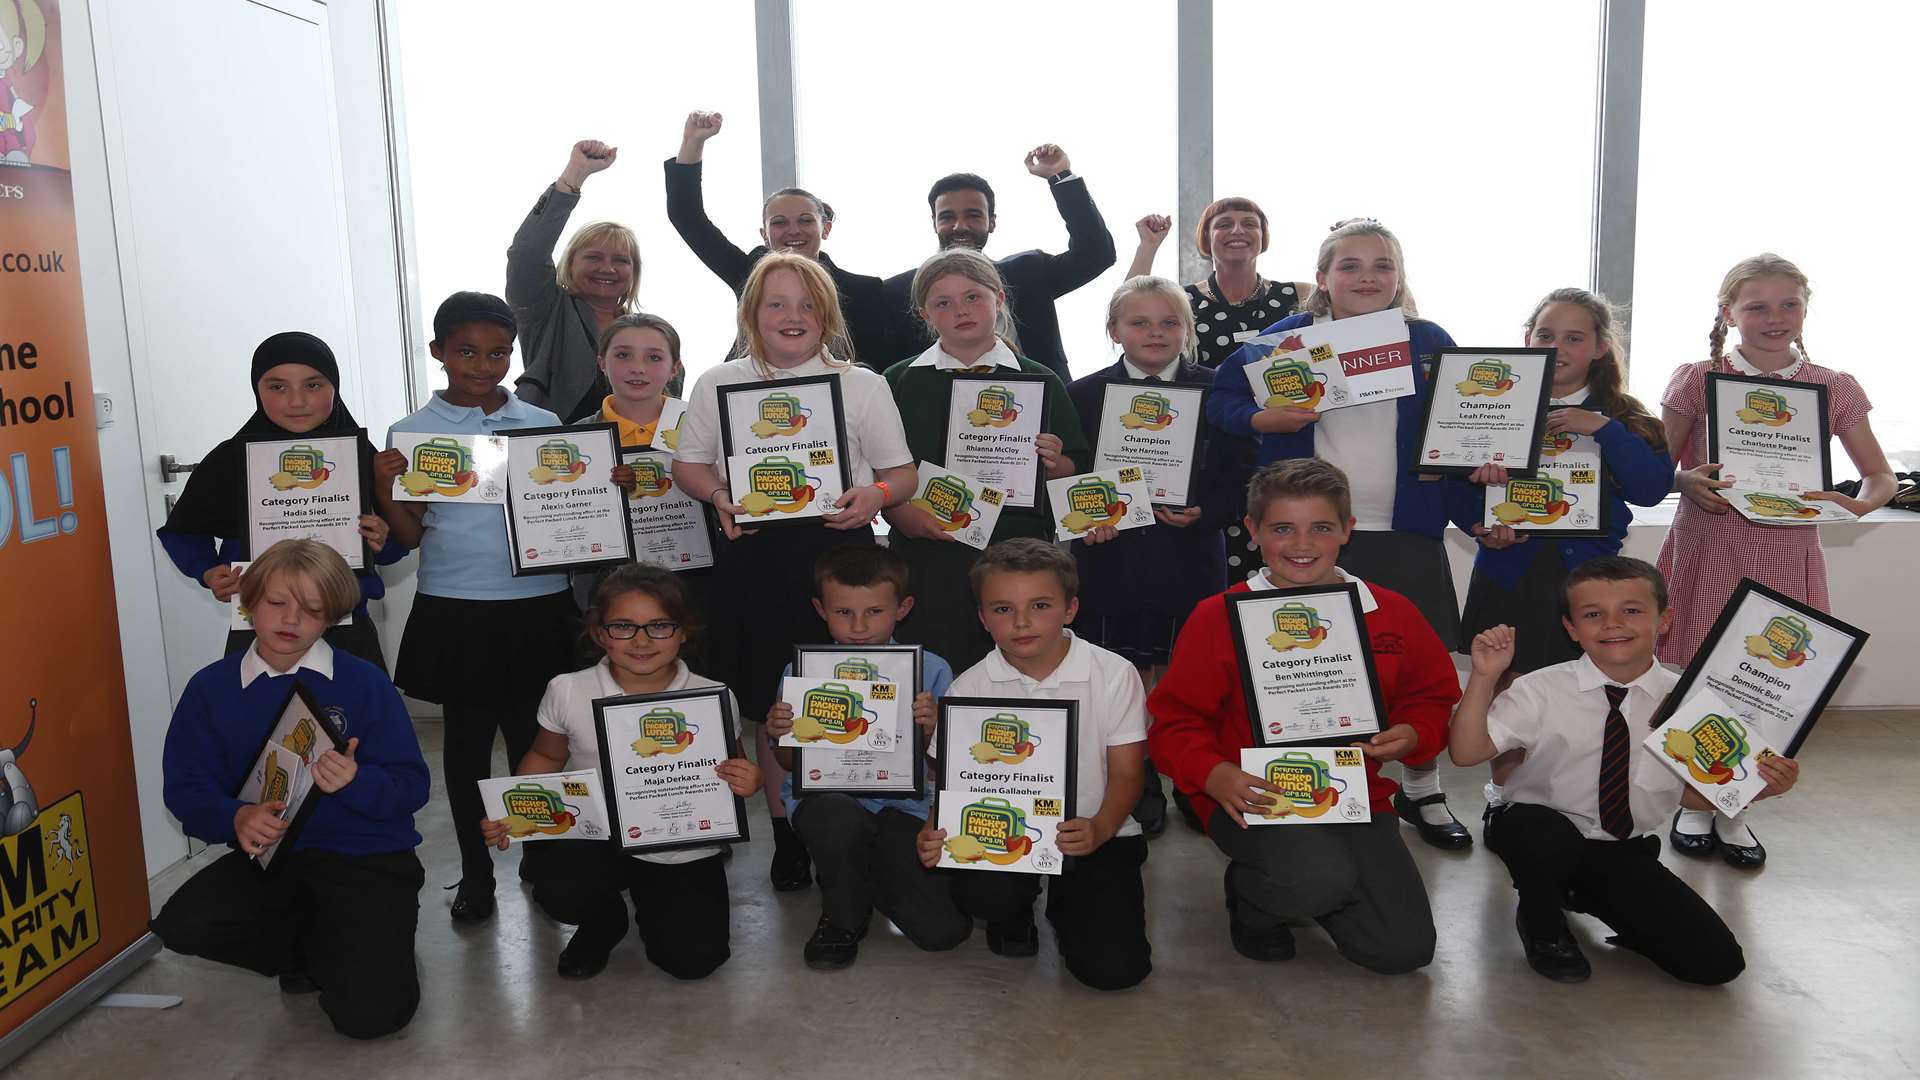 All winners and finalists at the Perfect Packed Lunch Awards 2015 with supporters from Three R’s Teacher Recruitment, Telcare, Art Projects for Schools and Turner Contemporary.